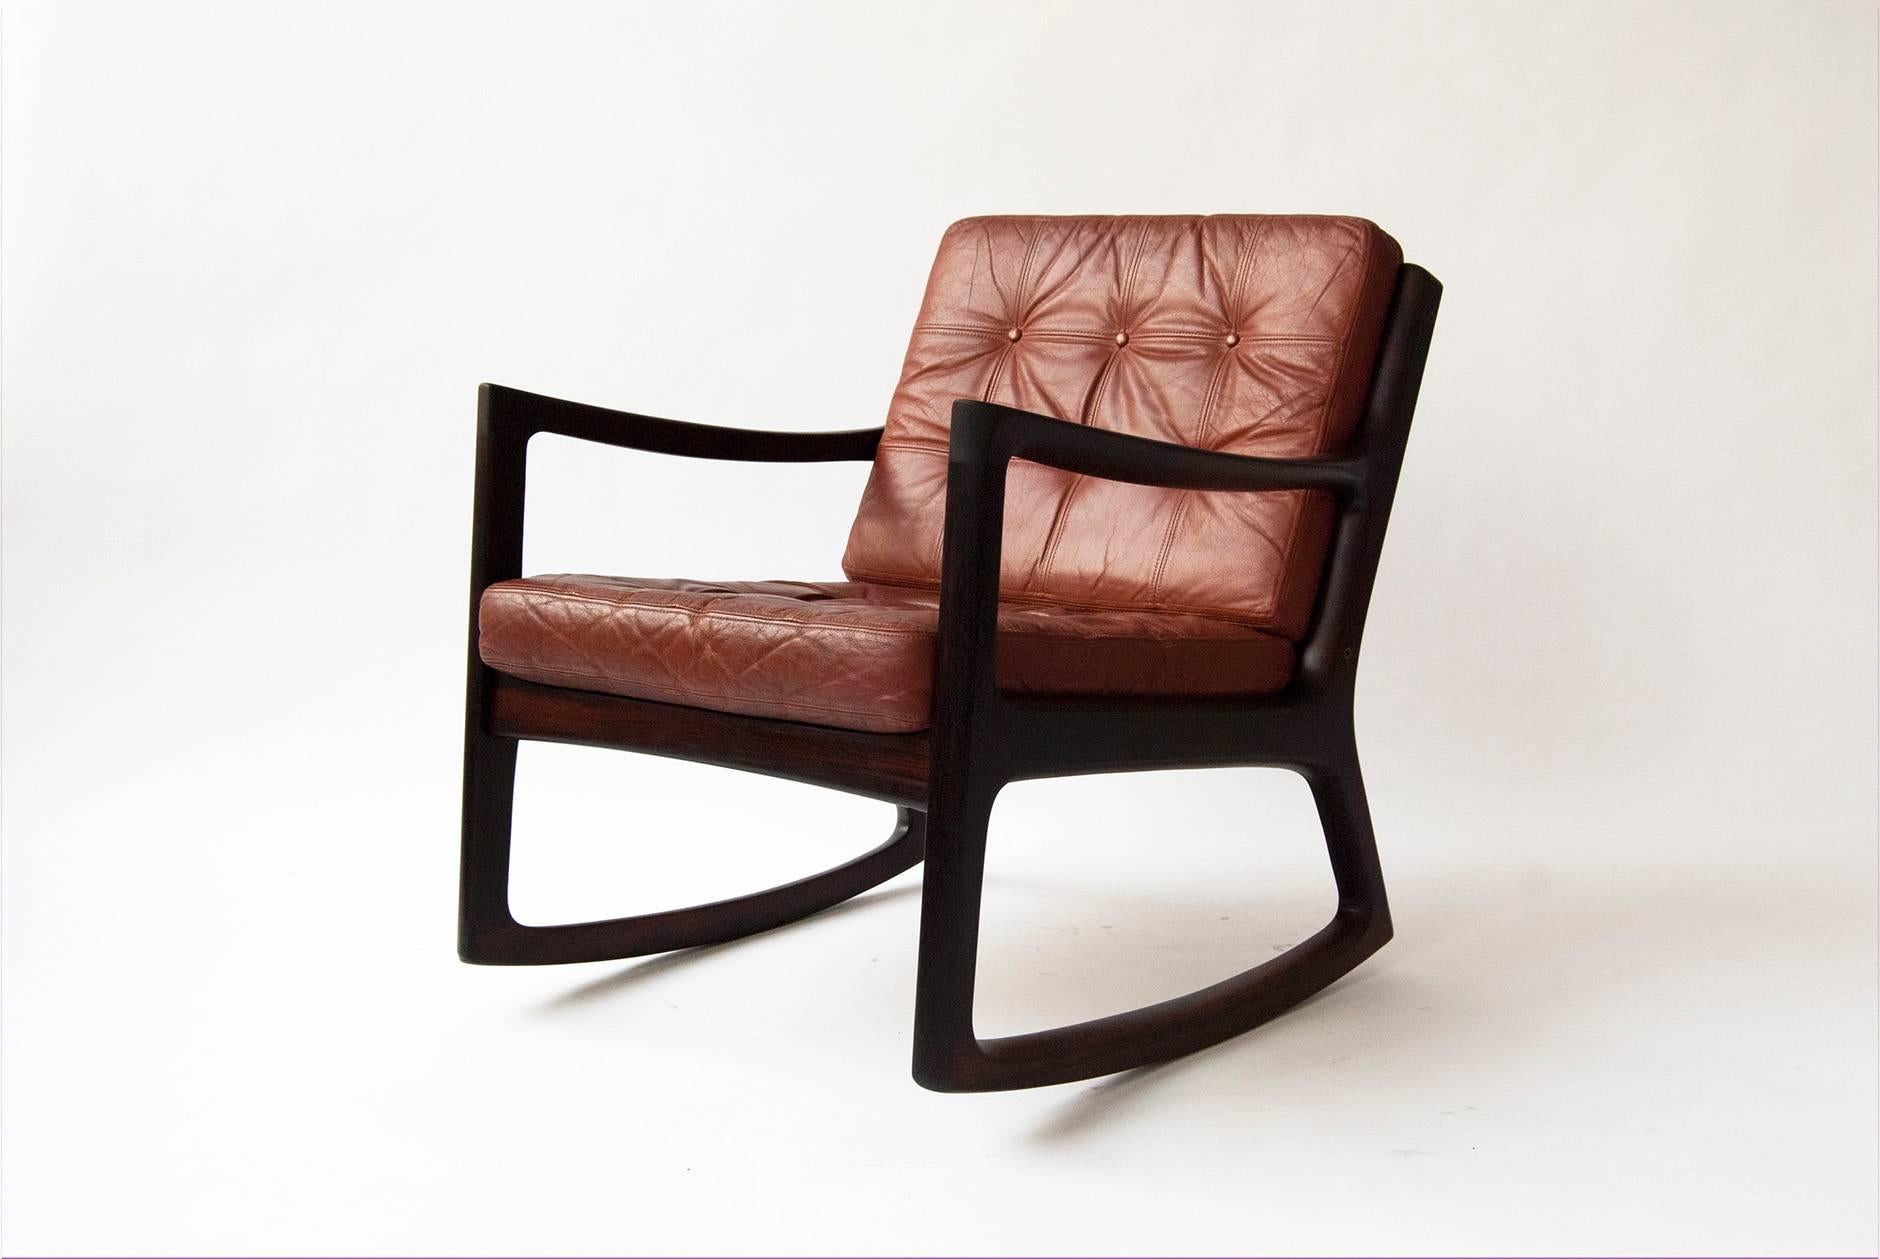 Ole Wanscher 'Senator' rocking chair, circa 1960. Produced by Cado, Denmark. Solid Brazilian rosewood. Includes maker's stamp and production number. Original patinated red leather cushions.